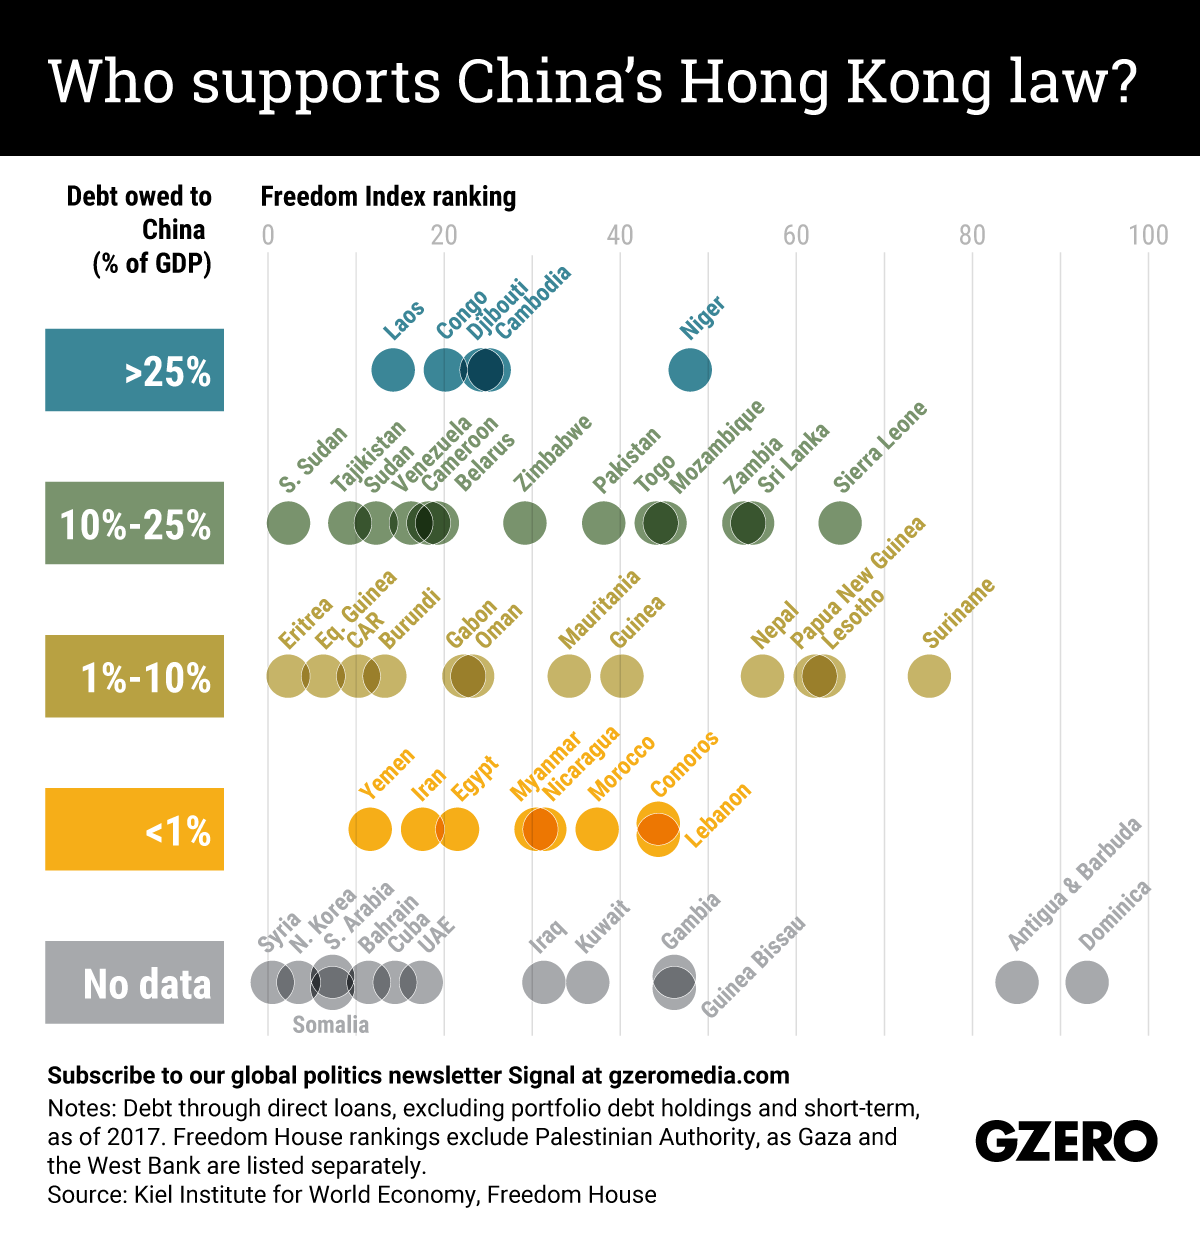 The Graphic Truth: Who supports China’s Hong Kong law?